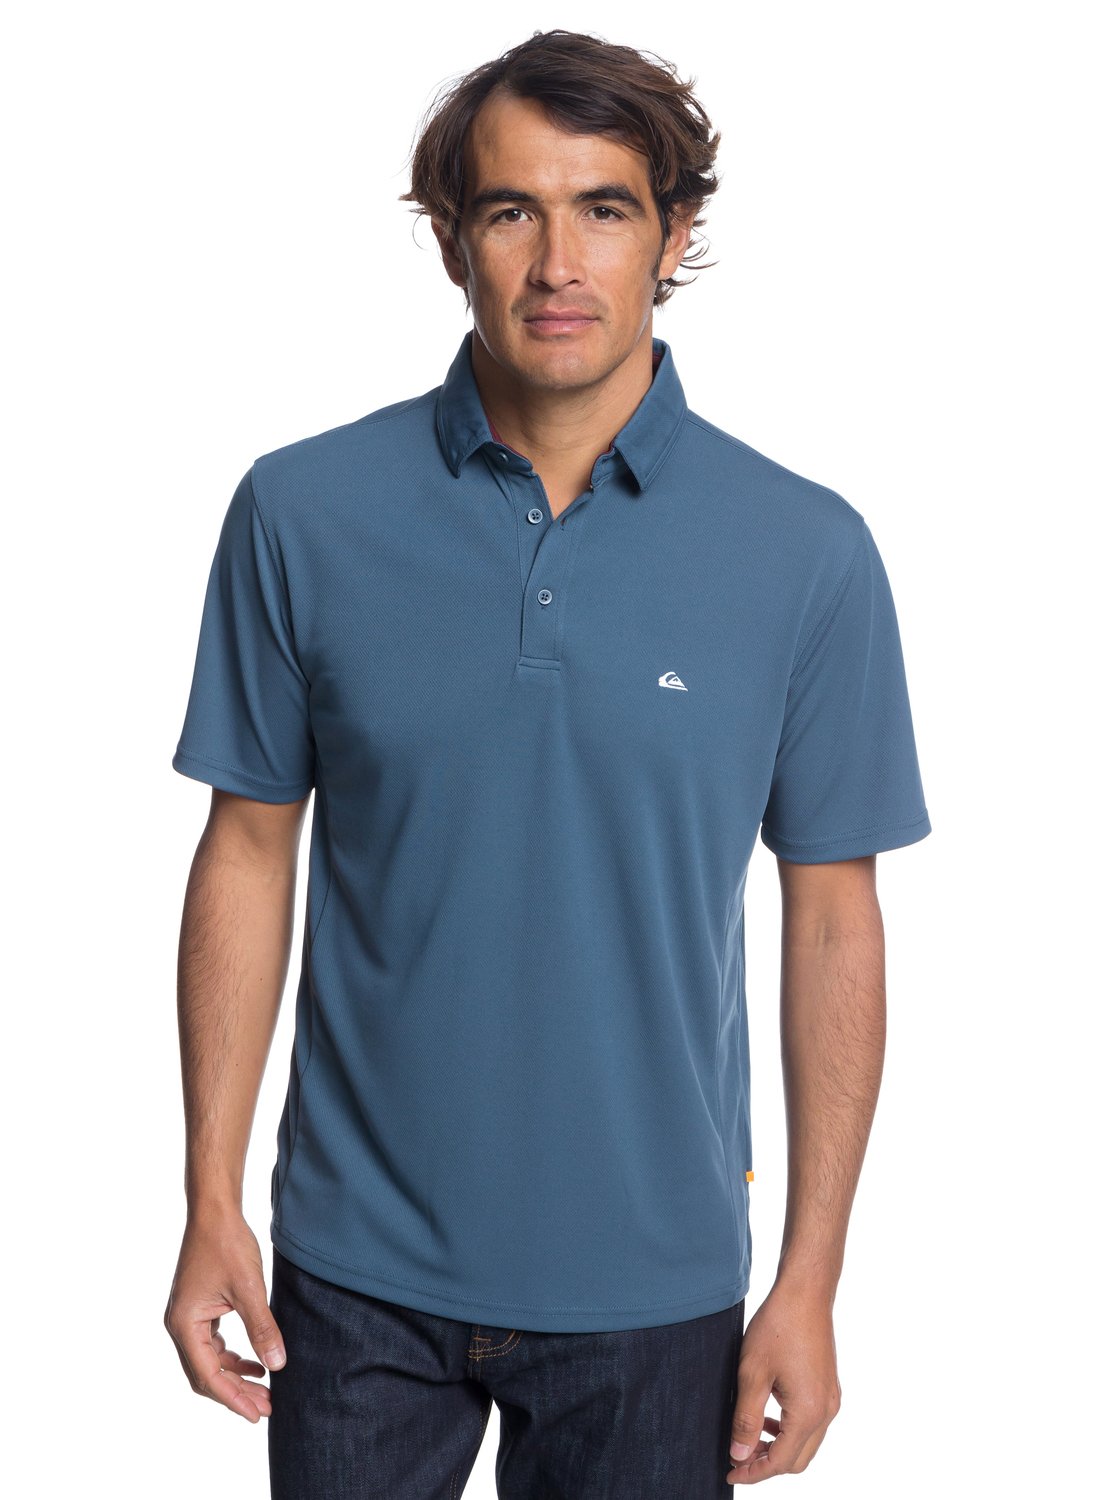 Quiksilver Waterman Water 2 Polo BRG0 M